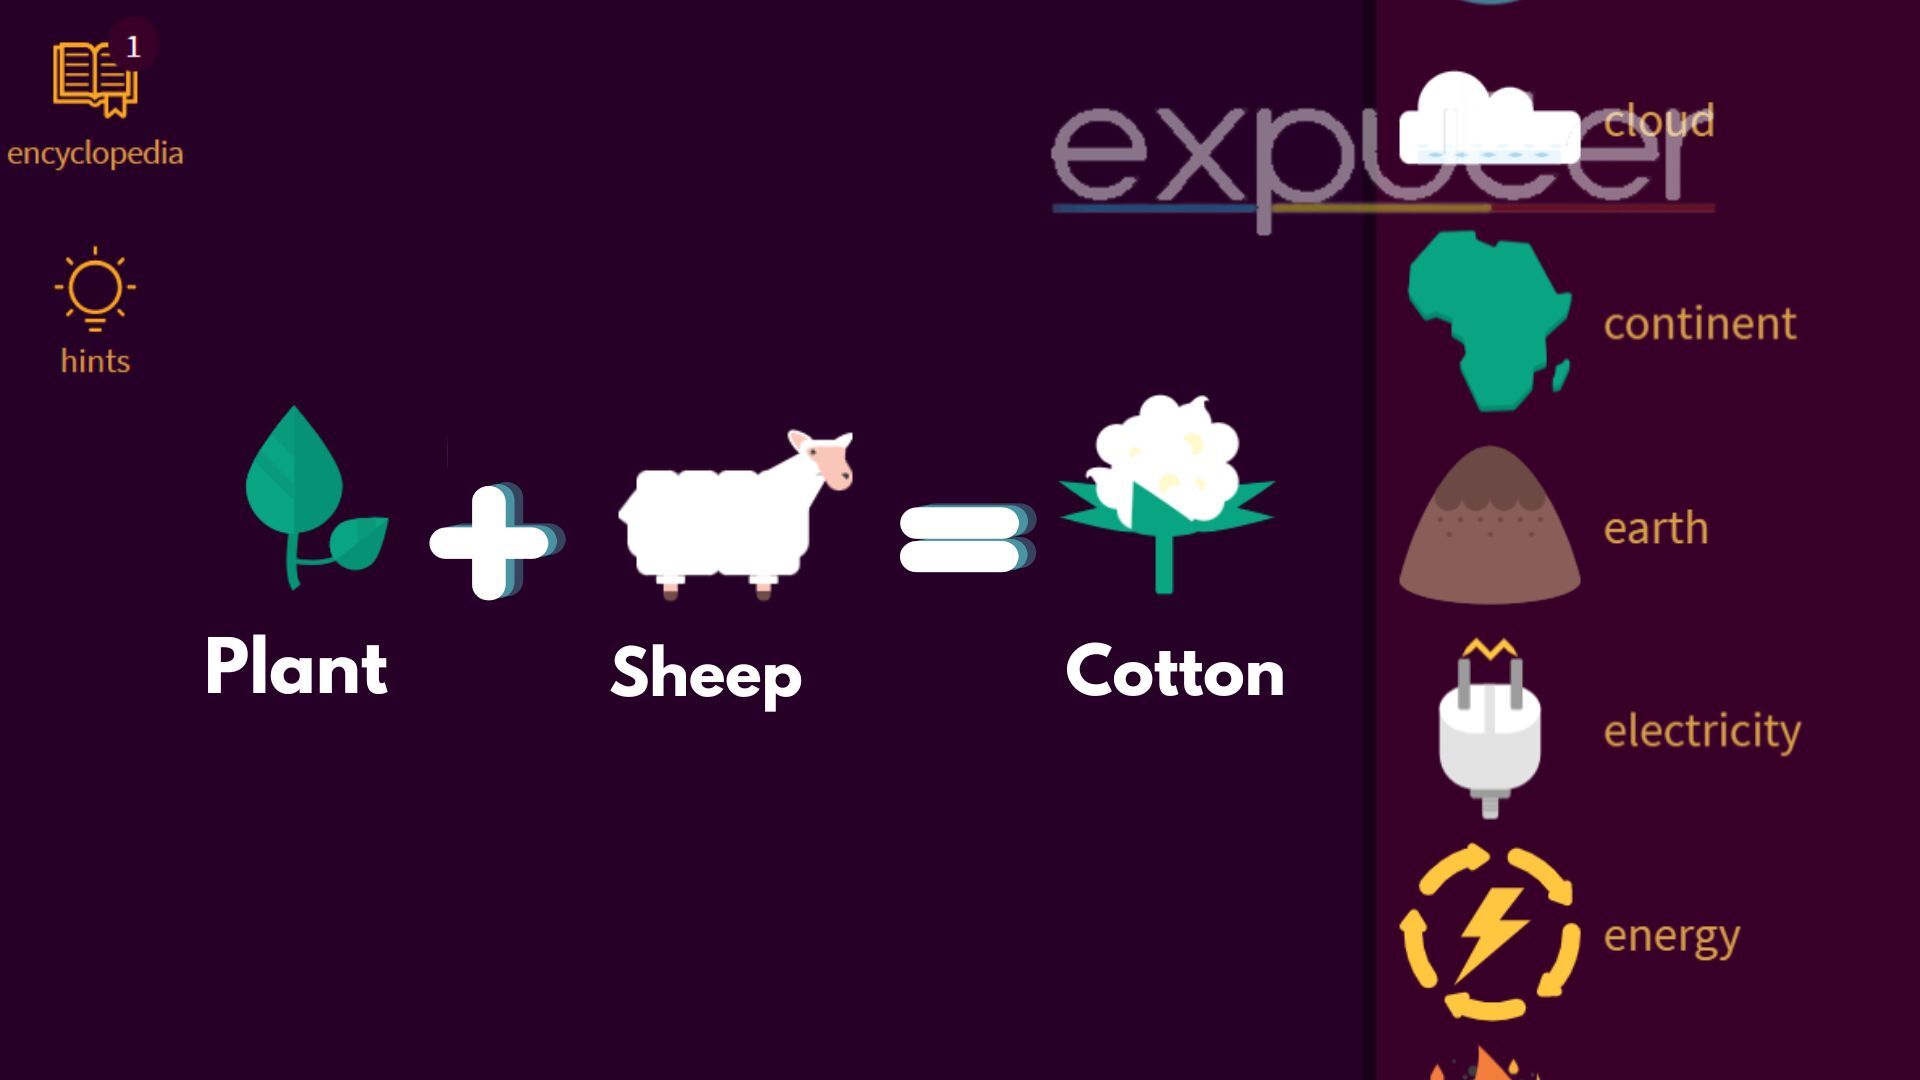 Little Alchemy 2: how to make cotton using plant and sheep